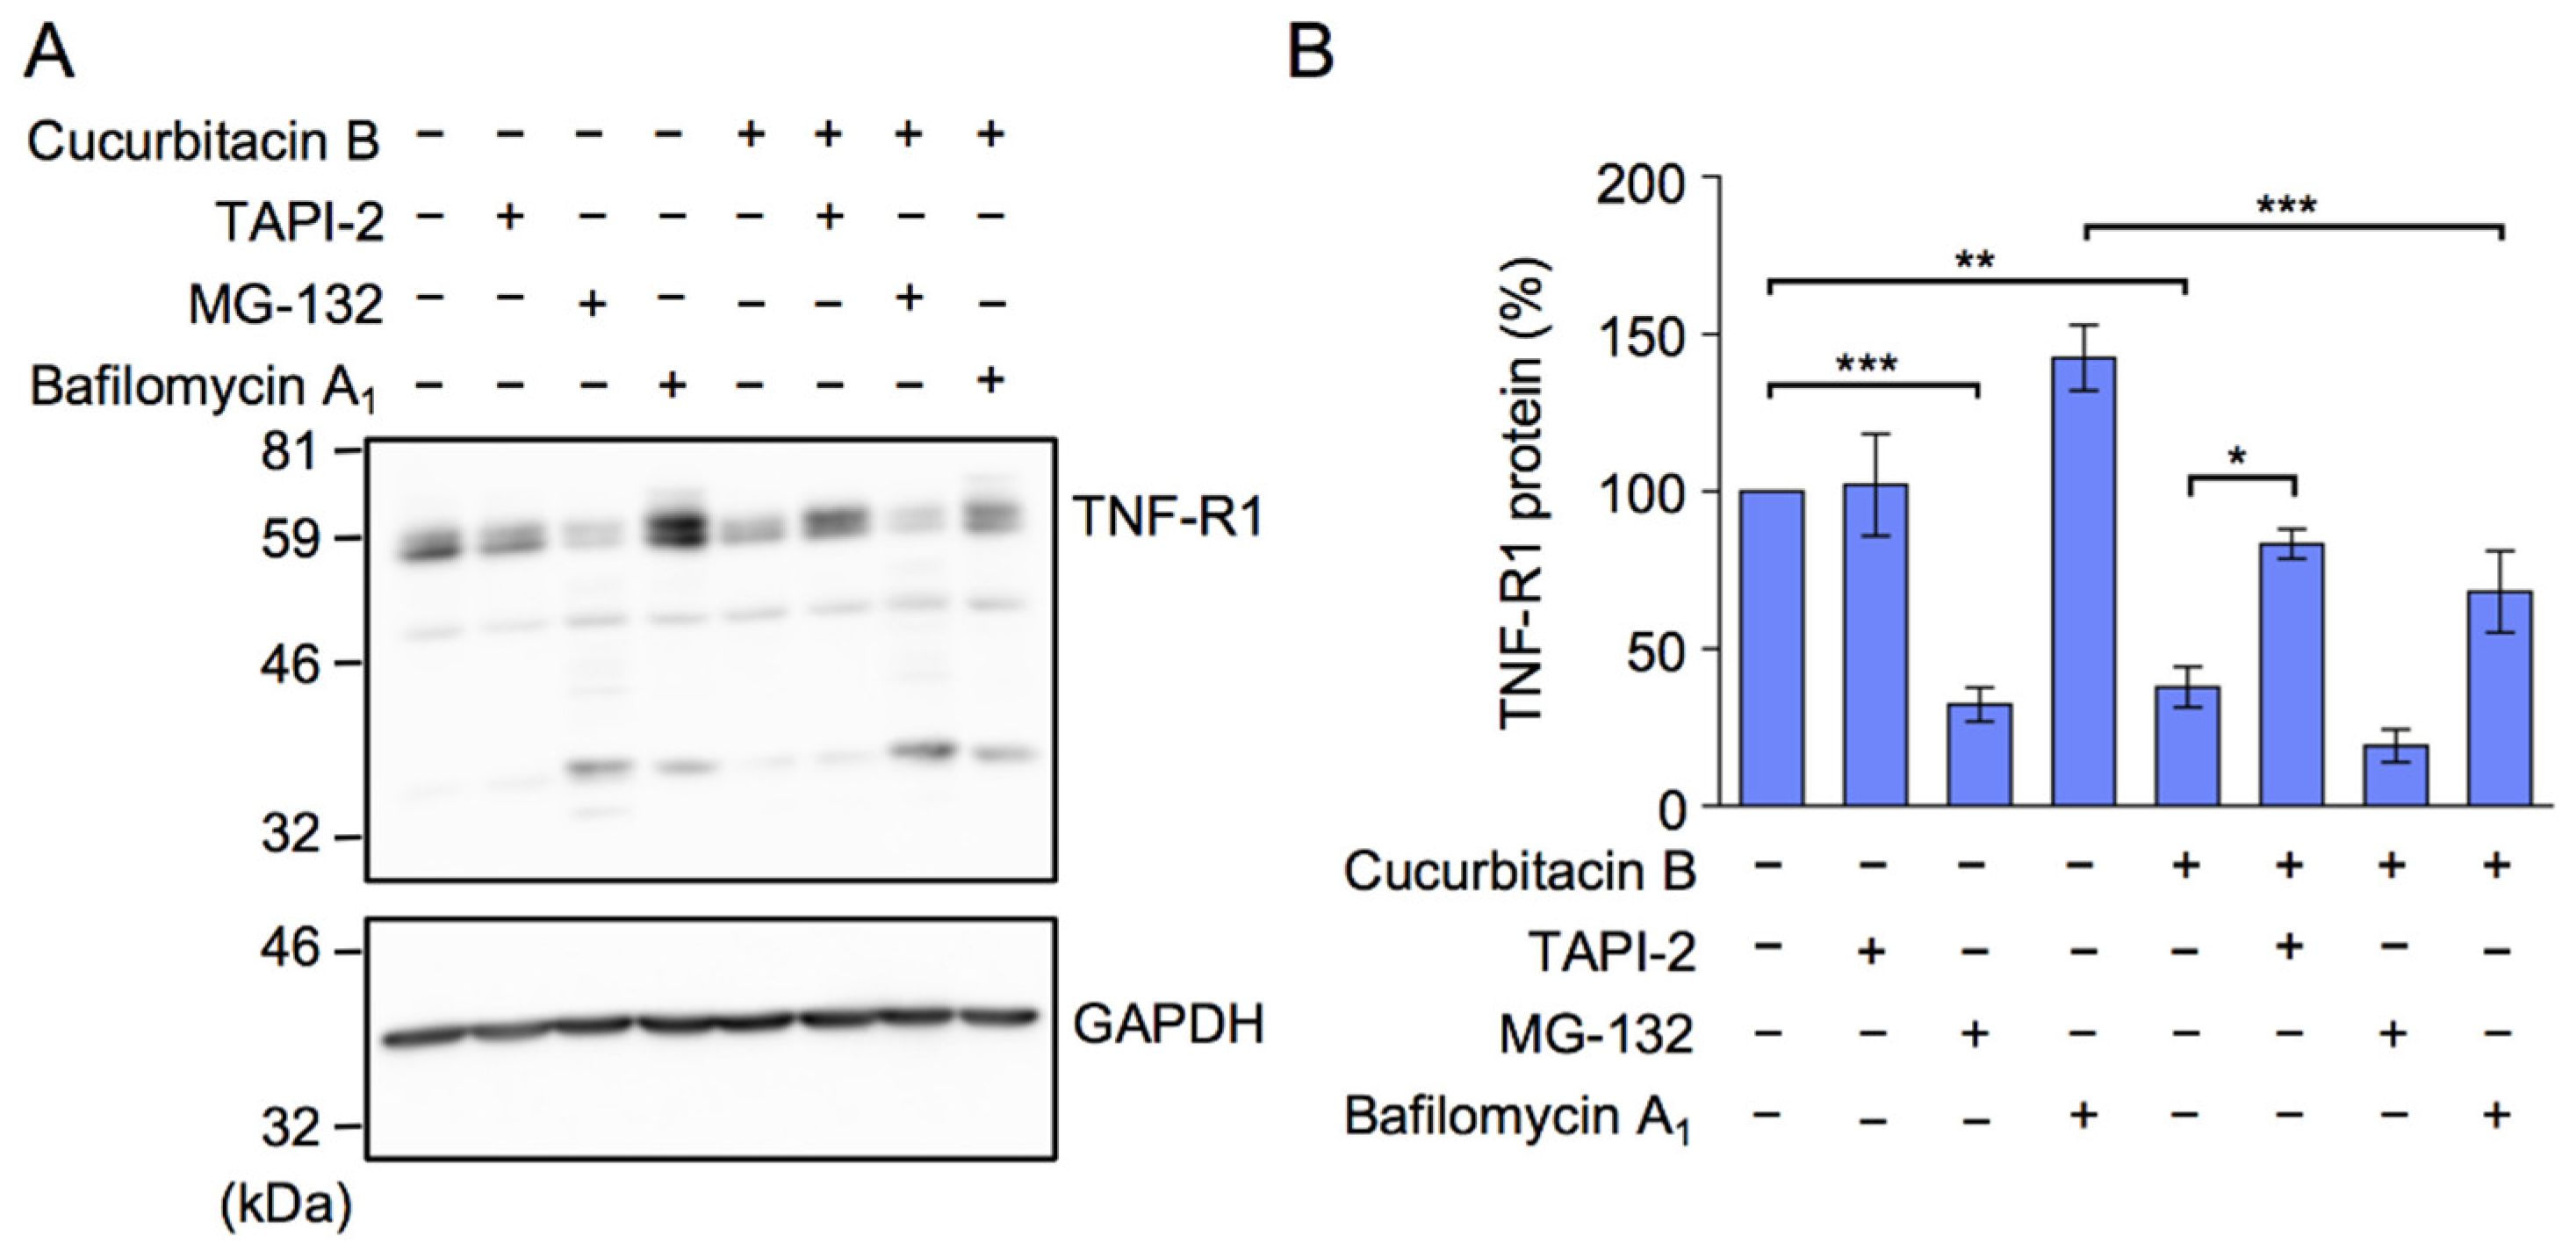 IJMS | Free Full-Text | Cucurbitacin B Down-Regulates TNF Receptor 1  Expression and Inhibits the TNF-&alpha;-Dependent Nuclear Factor &kappa;B  Signaling Pathway in Human Lung Adenocarcinoma A549 Cells | HTML